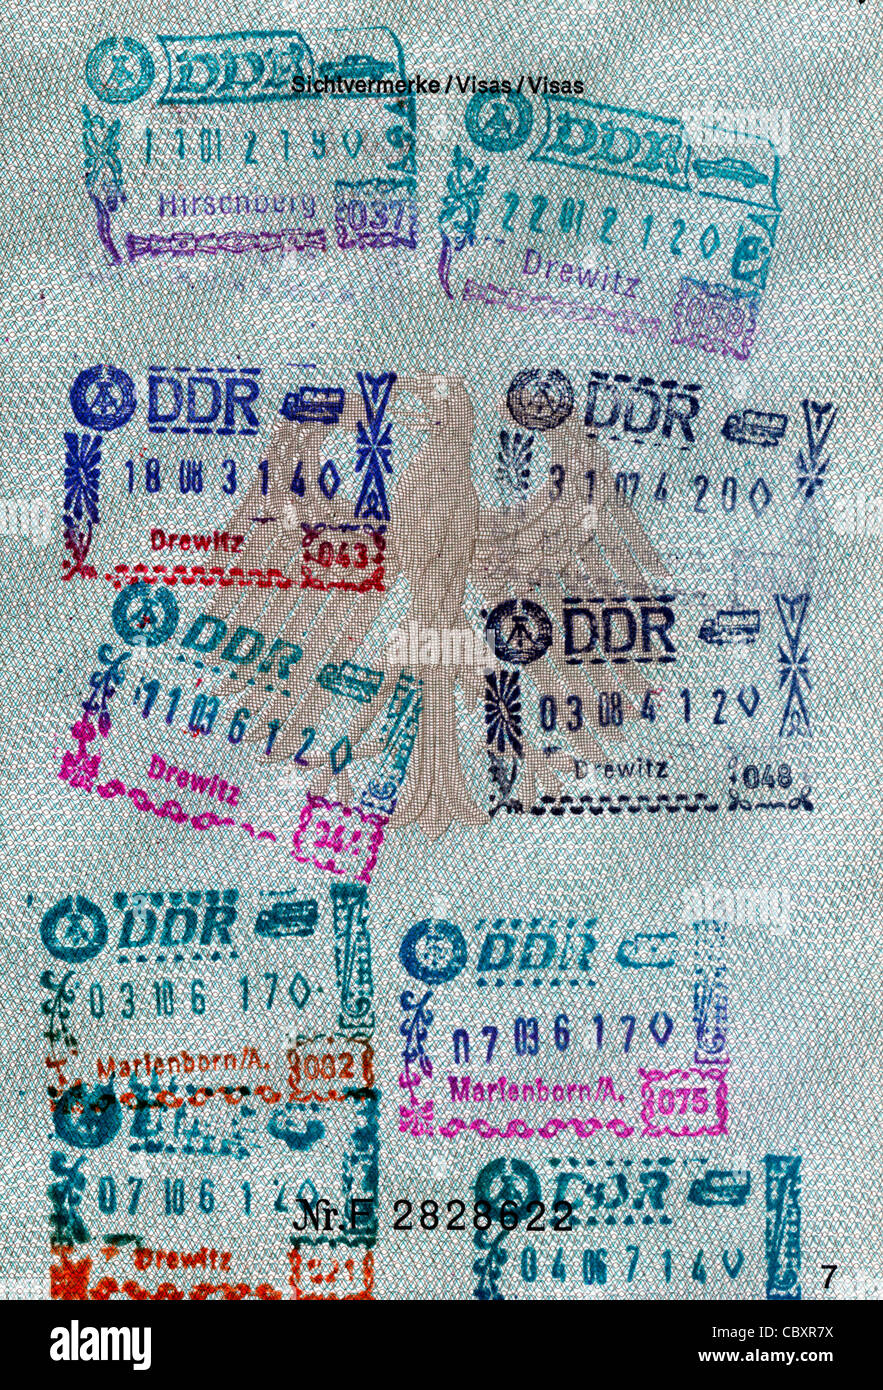 Passport of the Federal Republic of Germany with stamps of the German Democratic Republic for transit journeys by the GDR. Stock Photo